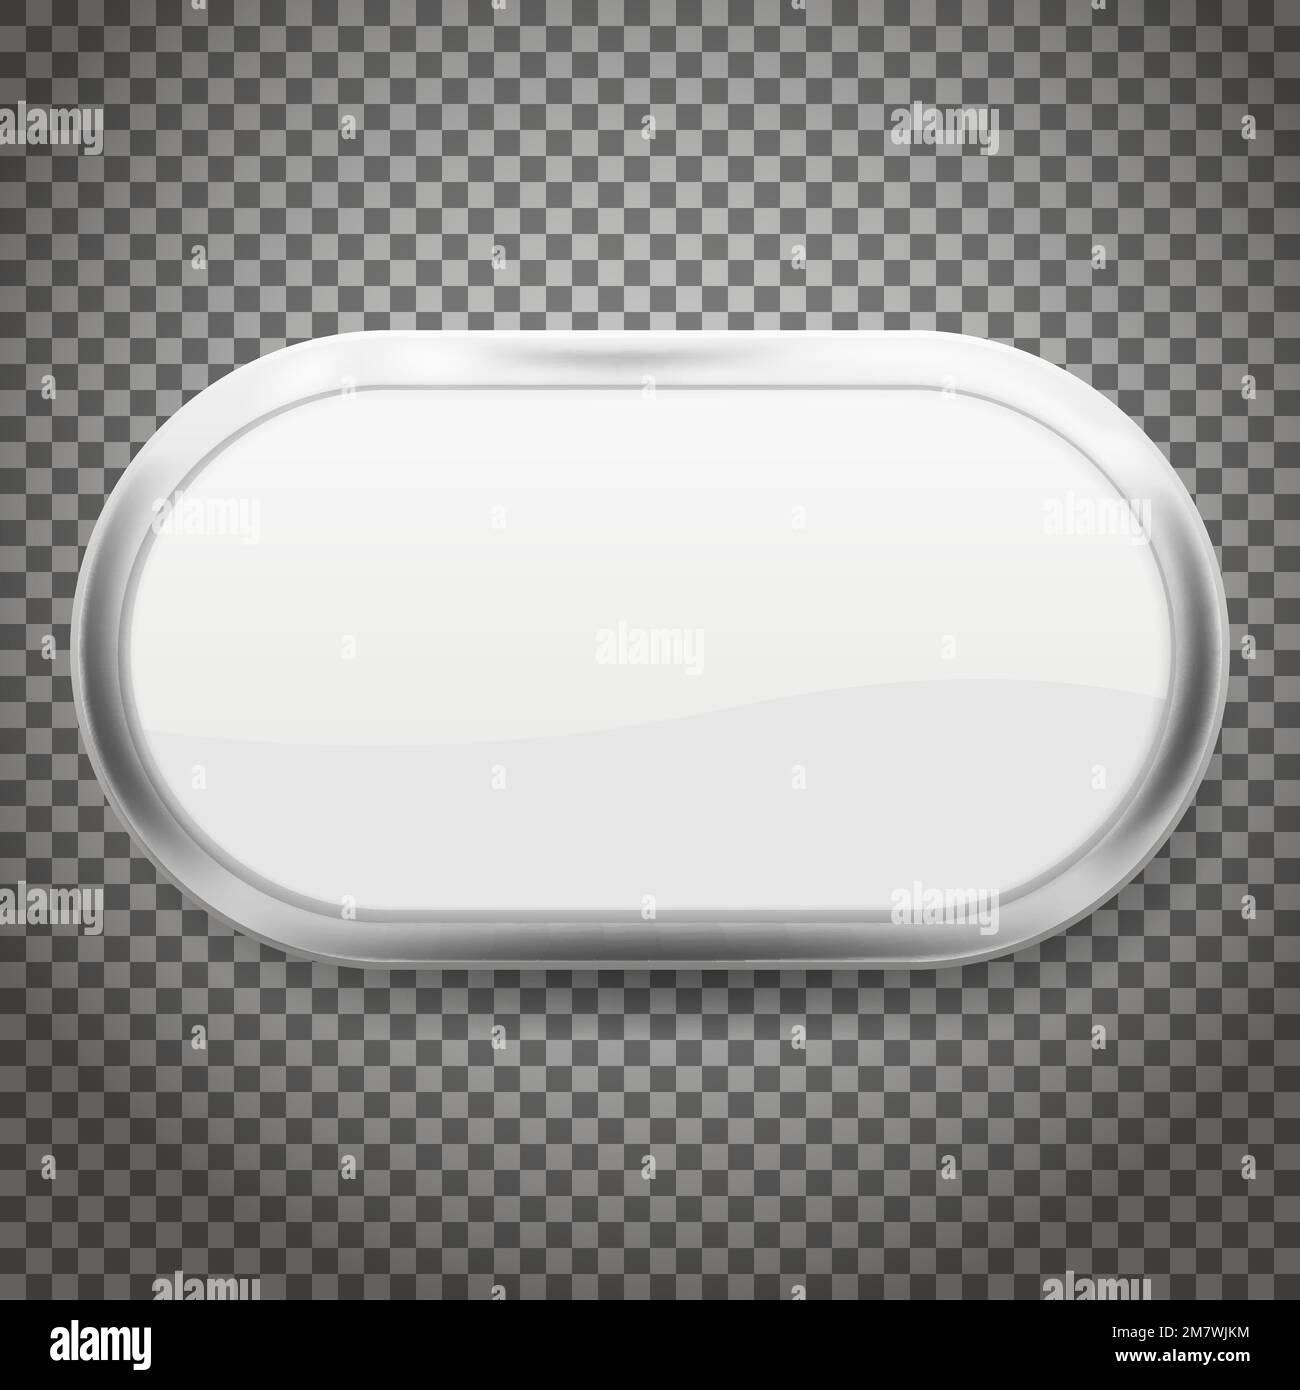 Oval buttons with chrome frame isolated on transparent background. Vector illustration. Eps 10. Stock Vector